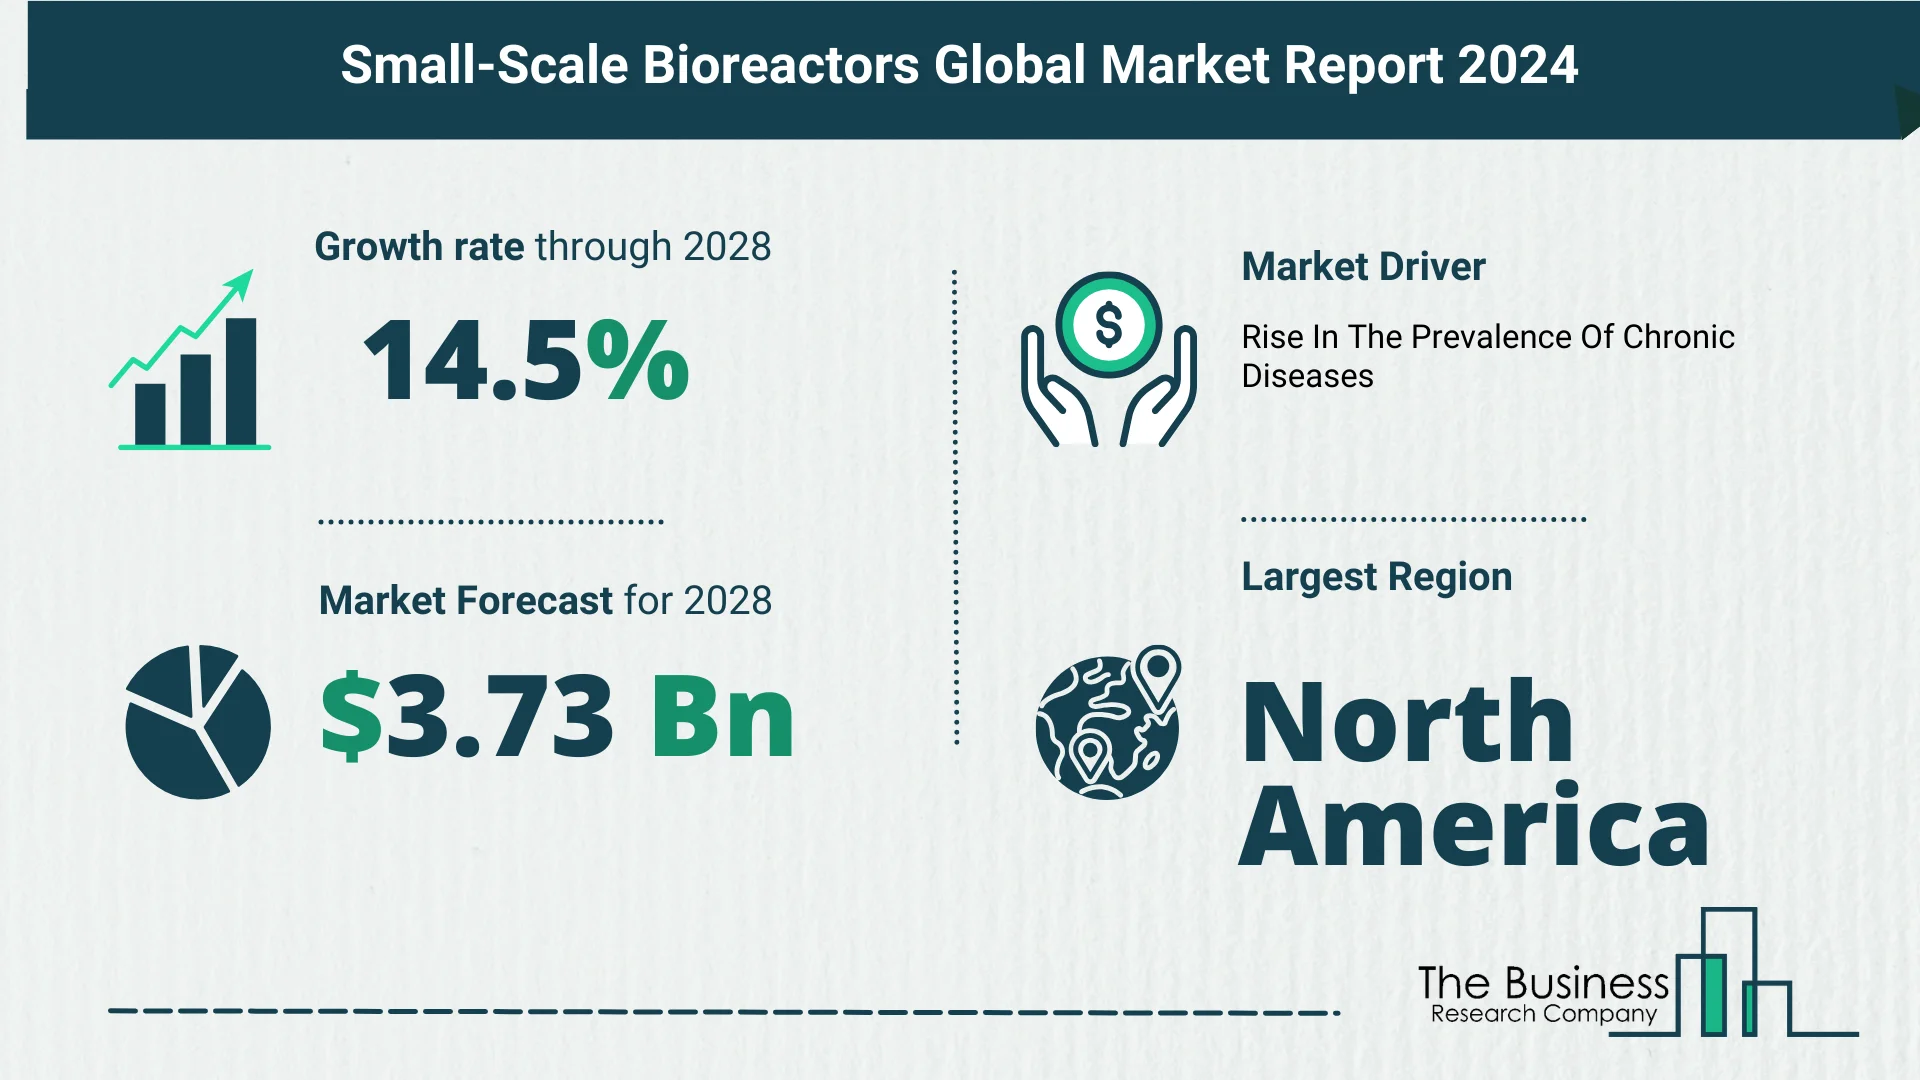 What Is The Forecast Growth Rate For The Small-Scale Bioreactors Market?